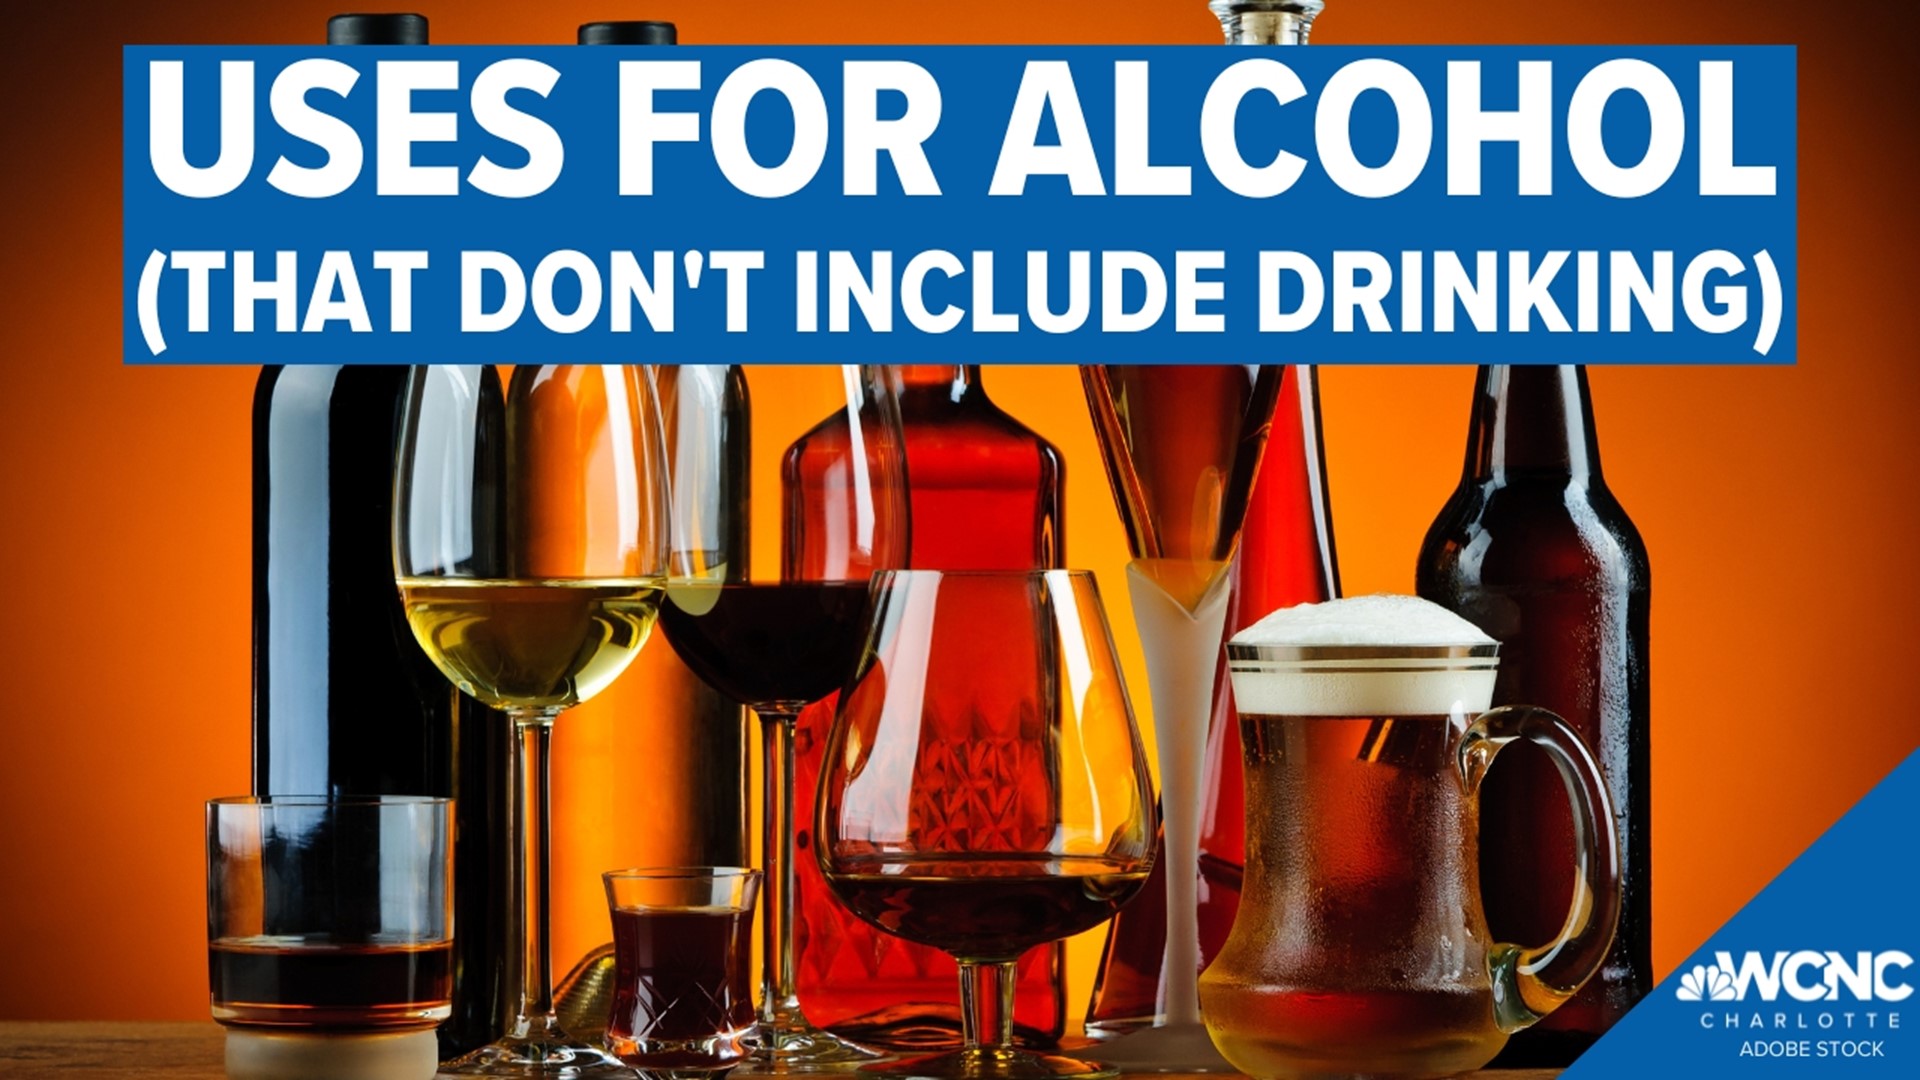 While you might not be drinking it, did you know alcohol has a lot of other uses?